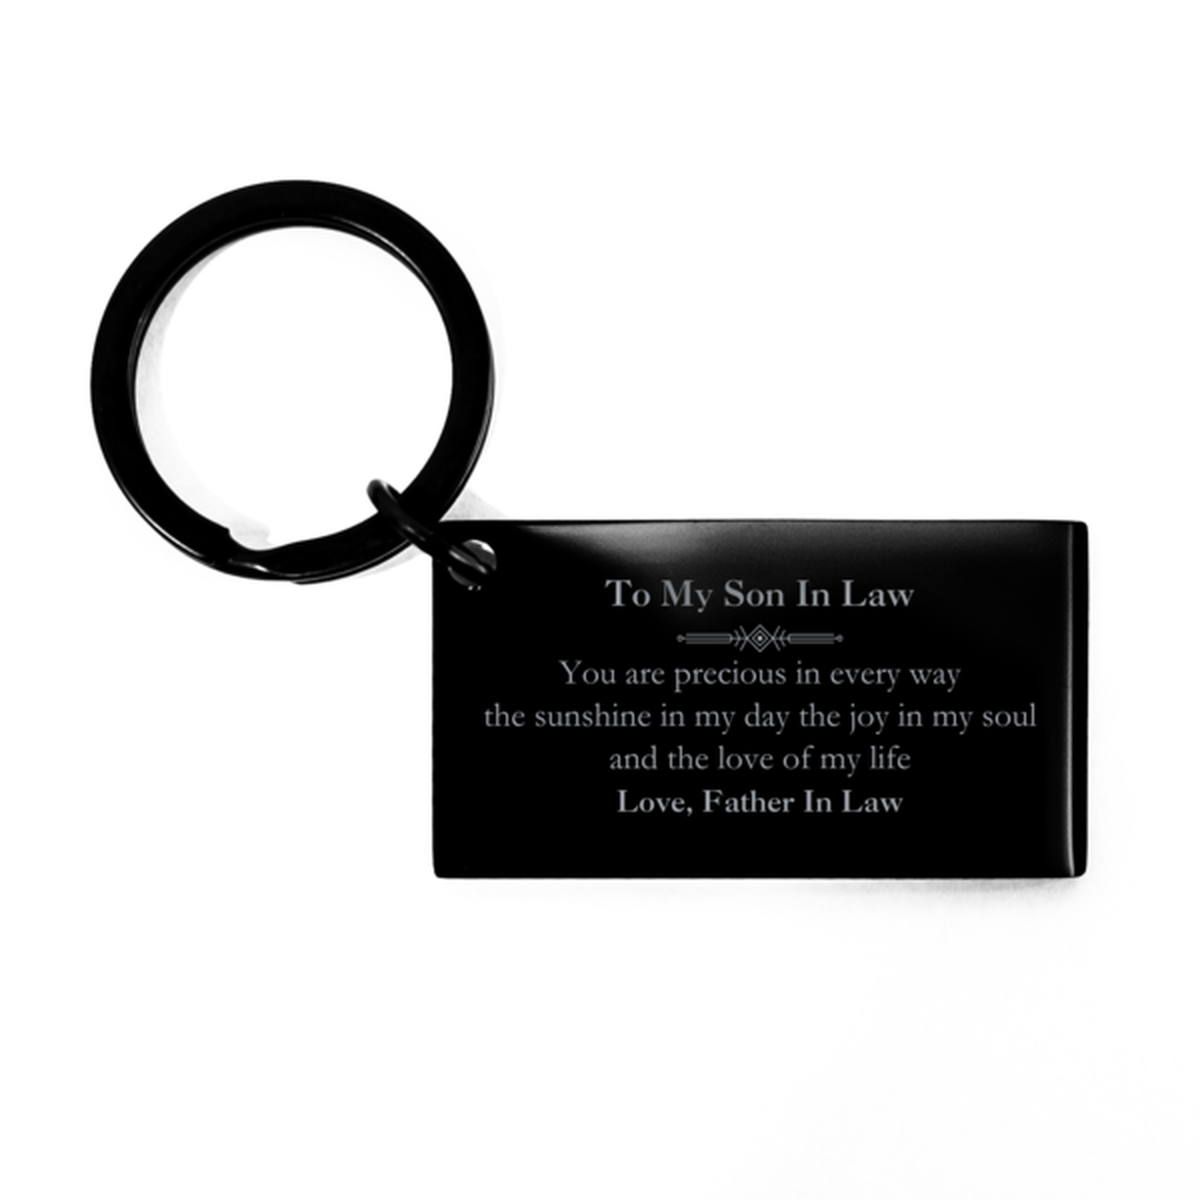 Graduation Gifts for Son In Law Keychain Present from Father In Law, Christmas Son In Law Birthday Gifts Son In Law You are precious in every way the sunshine in my day. Love, Father In Law